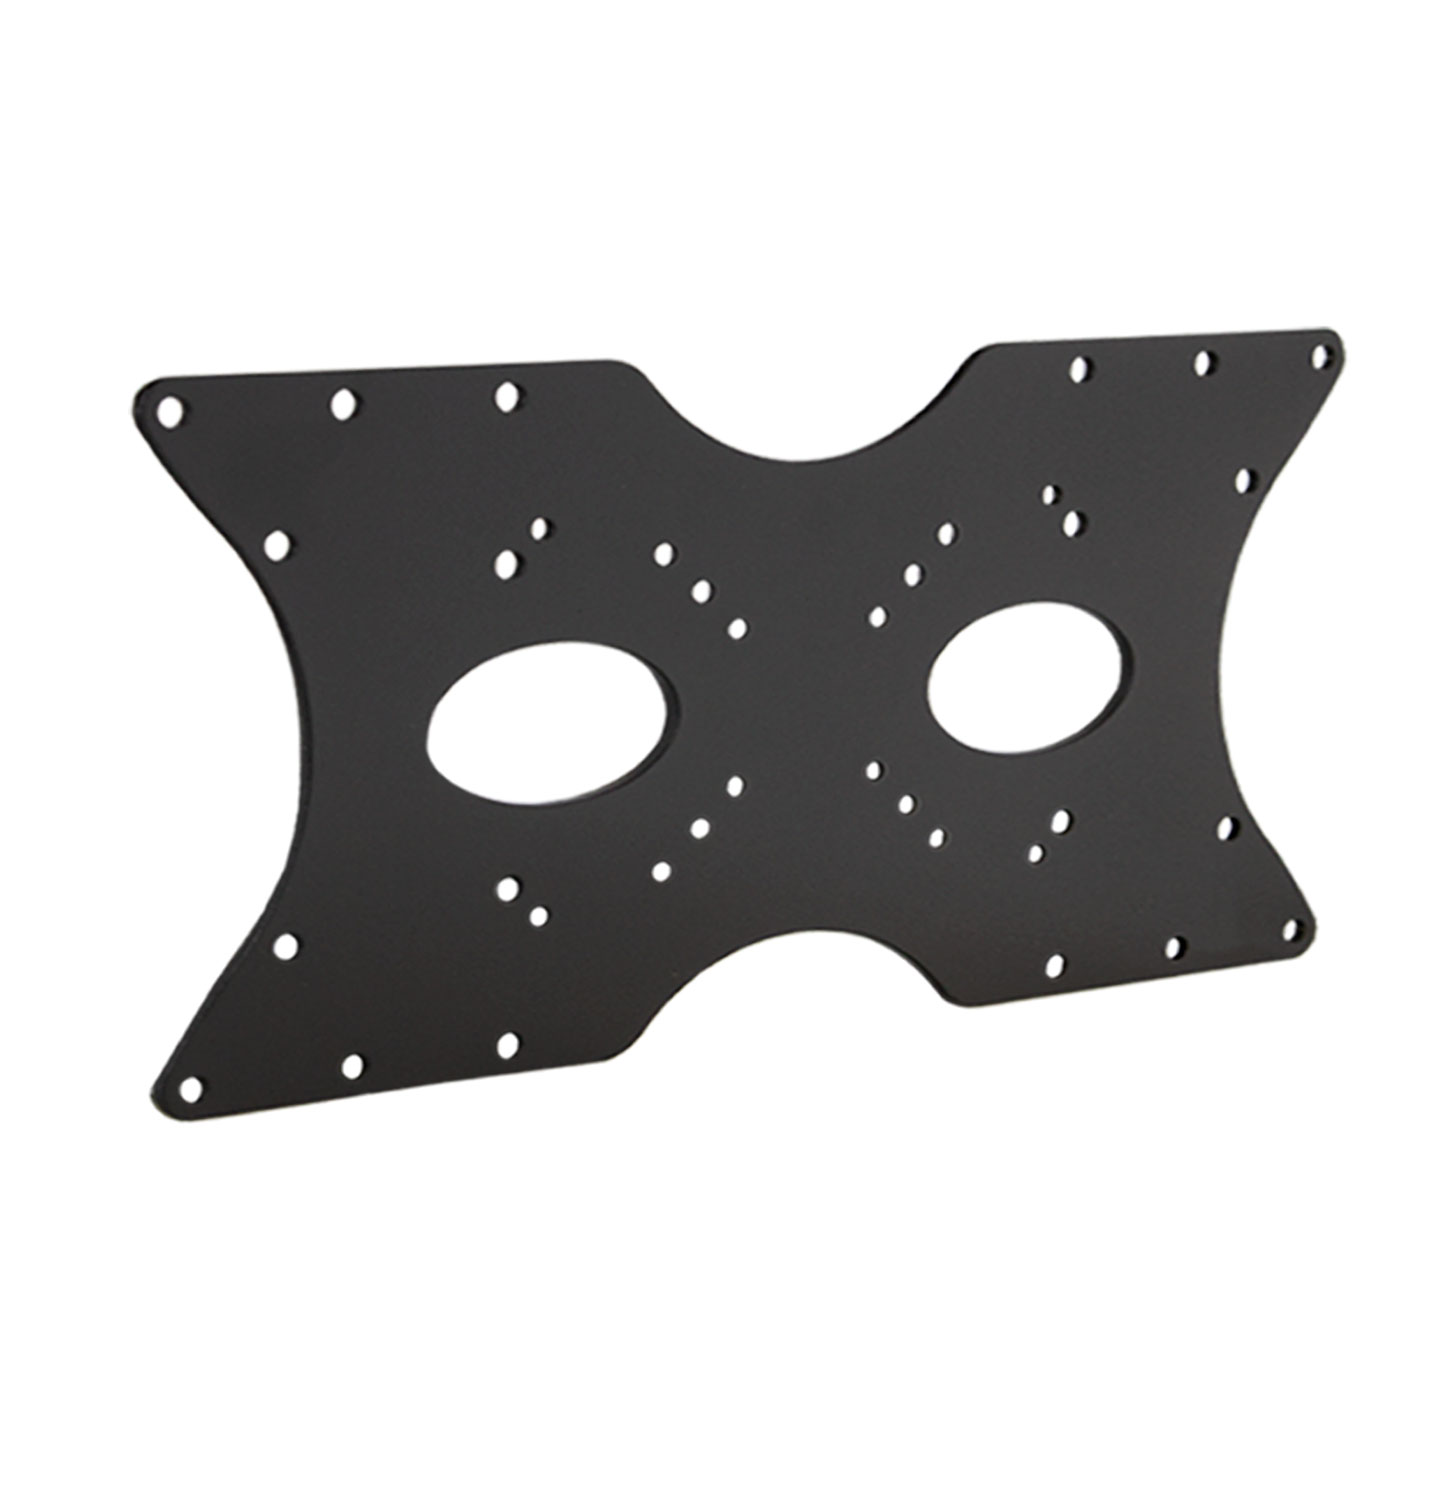 Mount-It! VESA Mount Adapter Plate | Conversion Kit Allows 75x75, 100x100, 200x200 to Fit Up to 400x200 mm Patterns - image 1 of 7